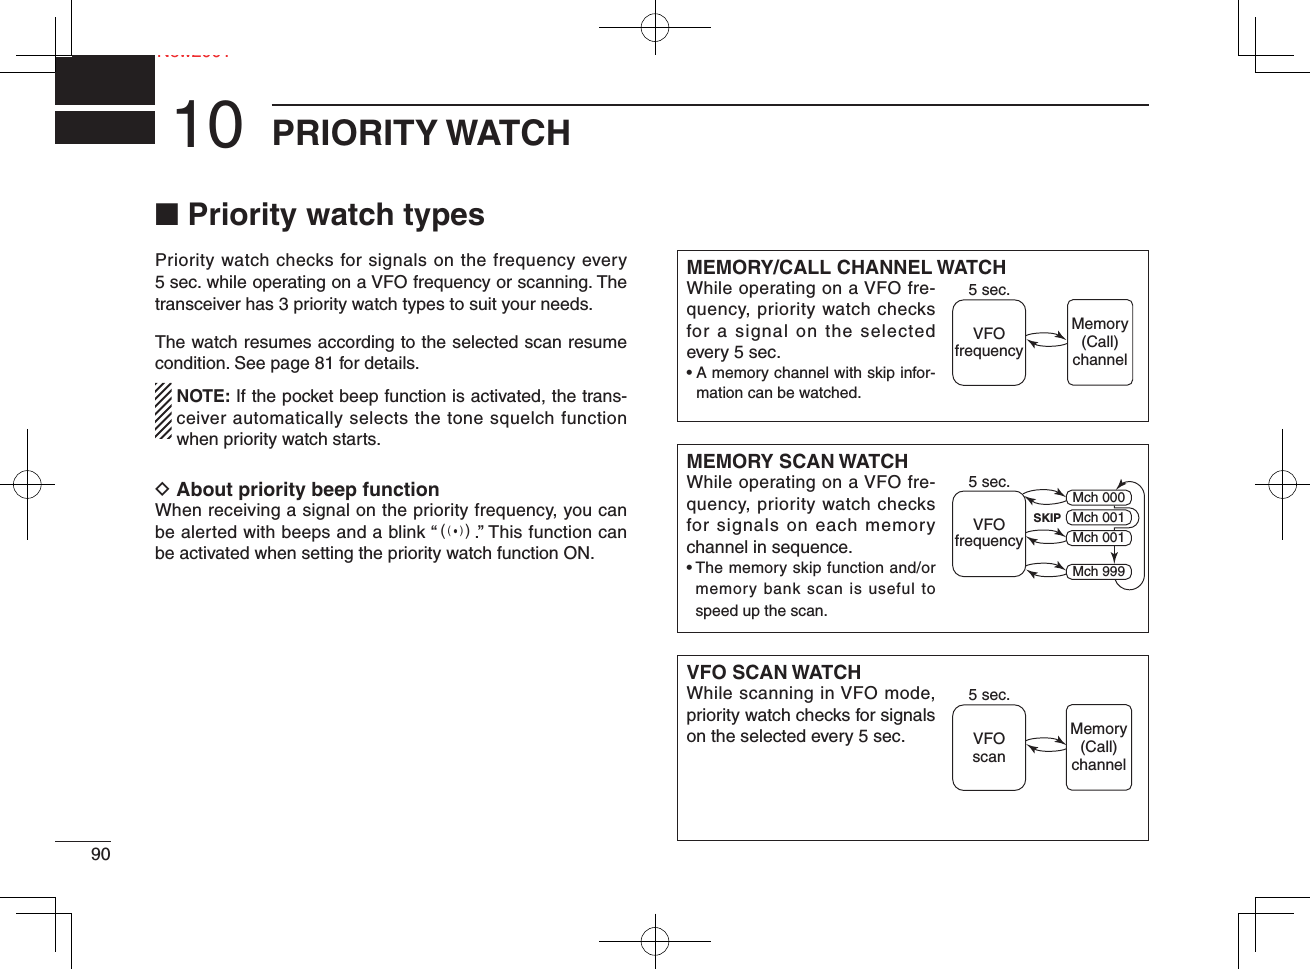 90NeNew2001PRIORITY WATCH10■ Priority watch typesPriority watch checks for signals on the frequency every 5 sec. while operating on a VFO frequency or scanning. The transceiver has 3 priority watch types to suit your needs. The watch resumes according to the selected scan resume condition. See page 81 for details.  NOTE: If the pocket beep function is activated, the trans-ceiver automatically selects the tone squelch function when priority watch starts.D About priority beep functionWhen receiving a signal on the priority frequency, you can be alerted with beeps and a blink “S.” This function can be activated when setting the priority watch function ON.MEMORY/CALL CHANNEL WATCHWhile operating on a VFO fre-quency, priority watch checks for a signal on the selected every 5 sec.•  A memory channel with skip infor-mation can be watched.MEMORY SCAN WATCHWhile operating on a VFO fre-quency, priority watch checks for signals on each memory channel in sequence.•  The memory skip function and/or memory bank scan is useful to speed up the scan.VFO SCAN WATCHWhile scanning in VFO mode, priority watch checks for signals on the selected every 5 sec.5 sec.VFOfrequencyMemory(Call)channel5 sec.VFOfrequencySKIPMch 000Mch 001Mch 001Mch 9995 sec.VFOscanMemory(Call)channel